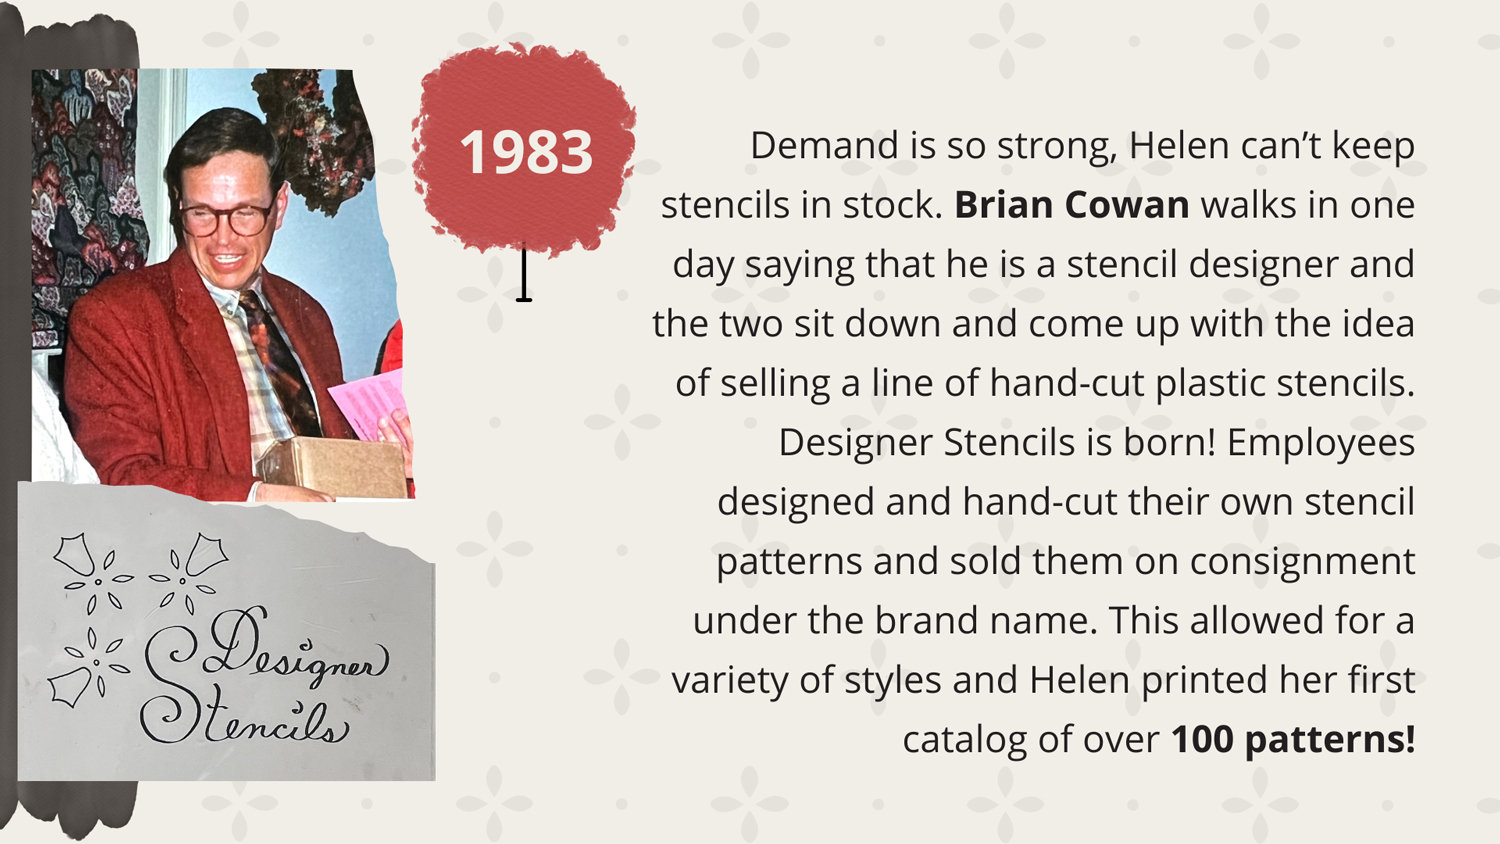 1983 - Demand is so strong, Helen can’t keep stencils in stock. Brian Cowan walks in one day saying that he is a stencil designer and the two sit down and come up with the idea of selling a line of hand-cut plastic stencils. Designer Stencils is born! Employees designed and hand-cut their own stencil patterns and sold them on consignment under the brand name. This allowed for a variety of styles and Helen printed her first catalog of over 100 patterns!